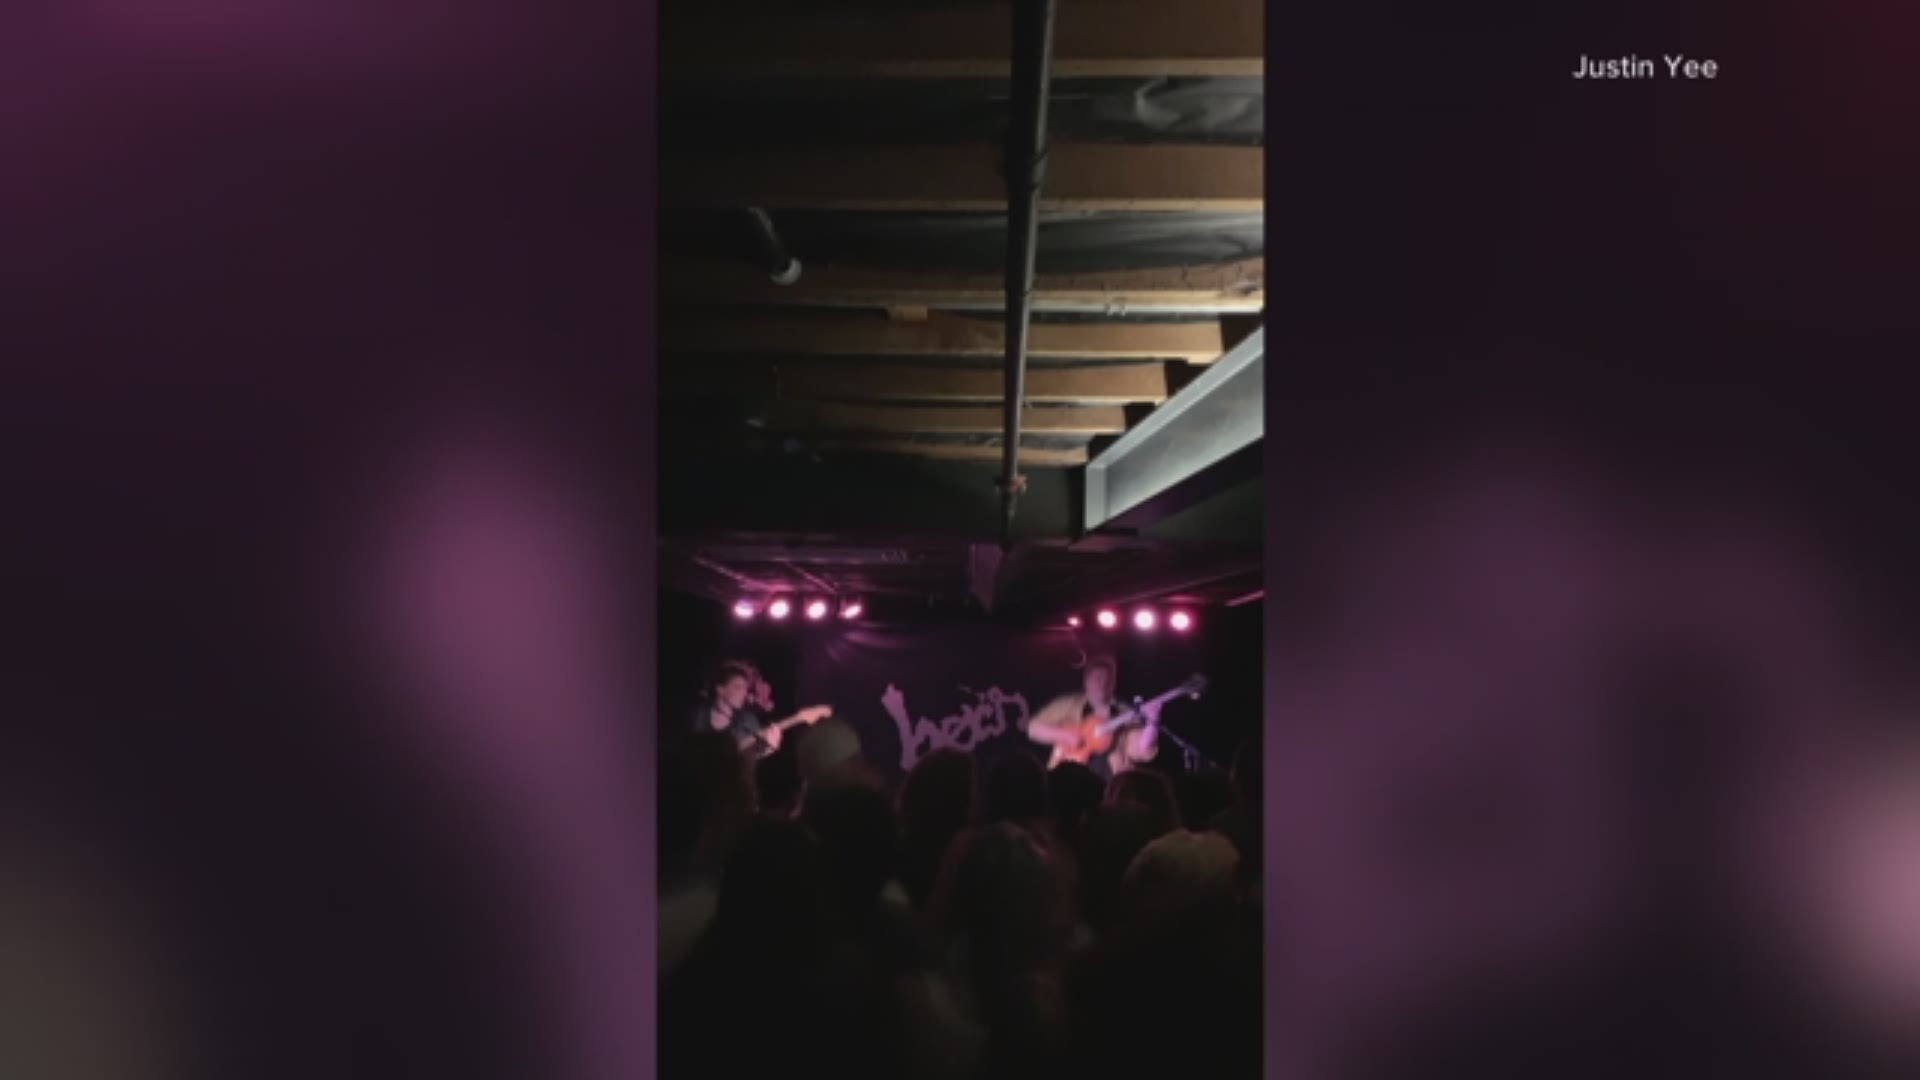 Justin Yee captured footage of the Liverpool band Her's performing during what would be their last performance at The Rebel Lounge in Phoenix. The band and their tour manager were killed in a wrong-way crash on I-10 west of Phoenix on March 27.